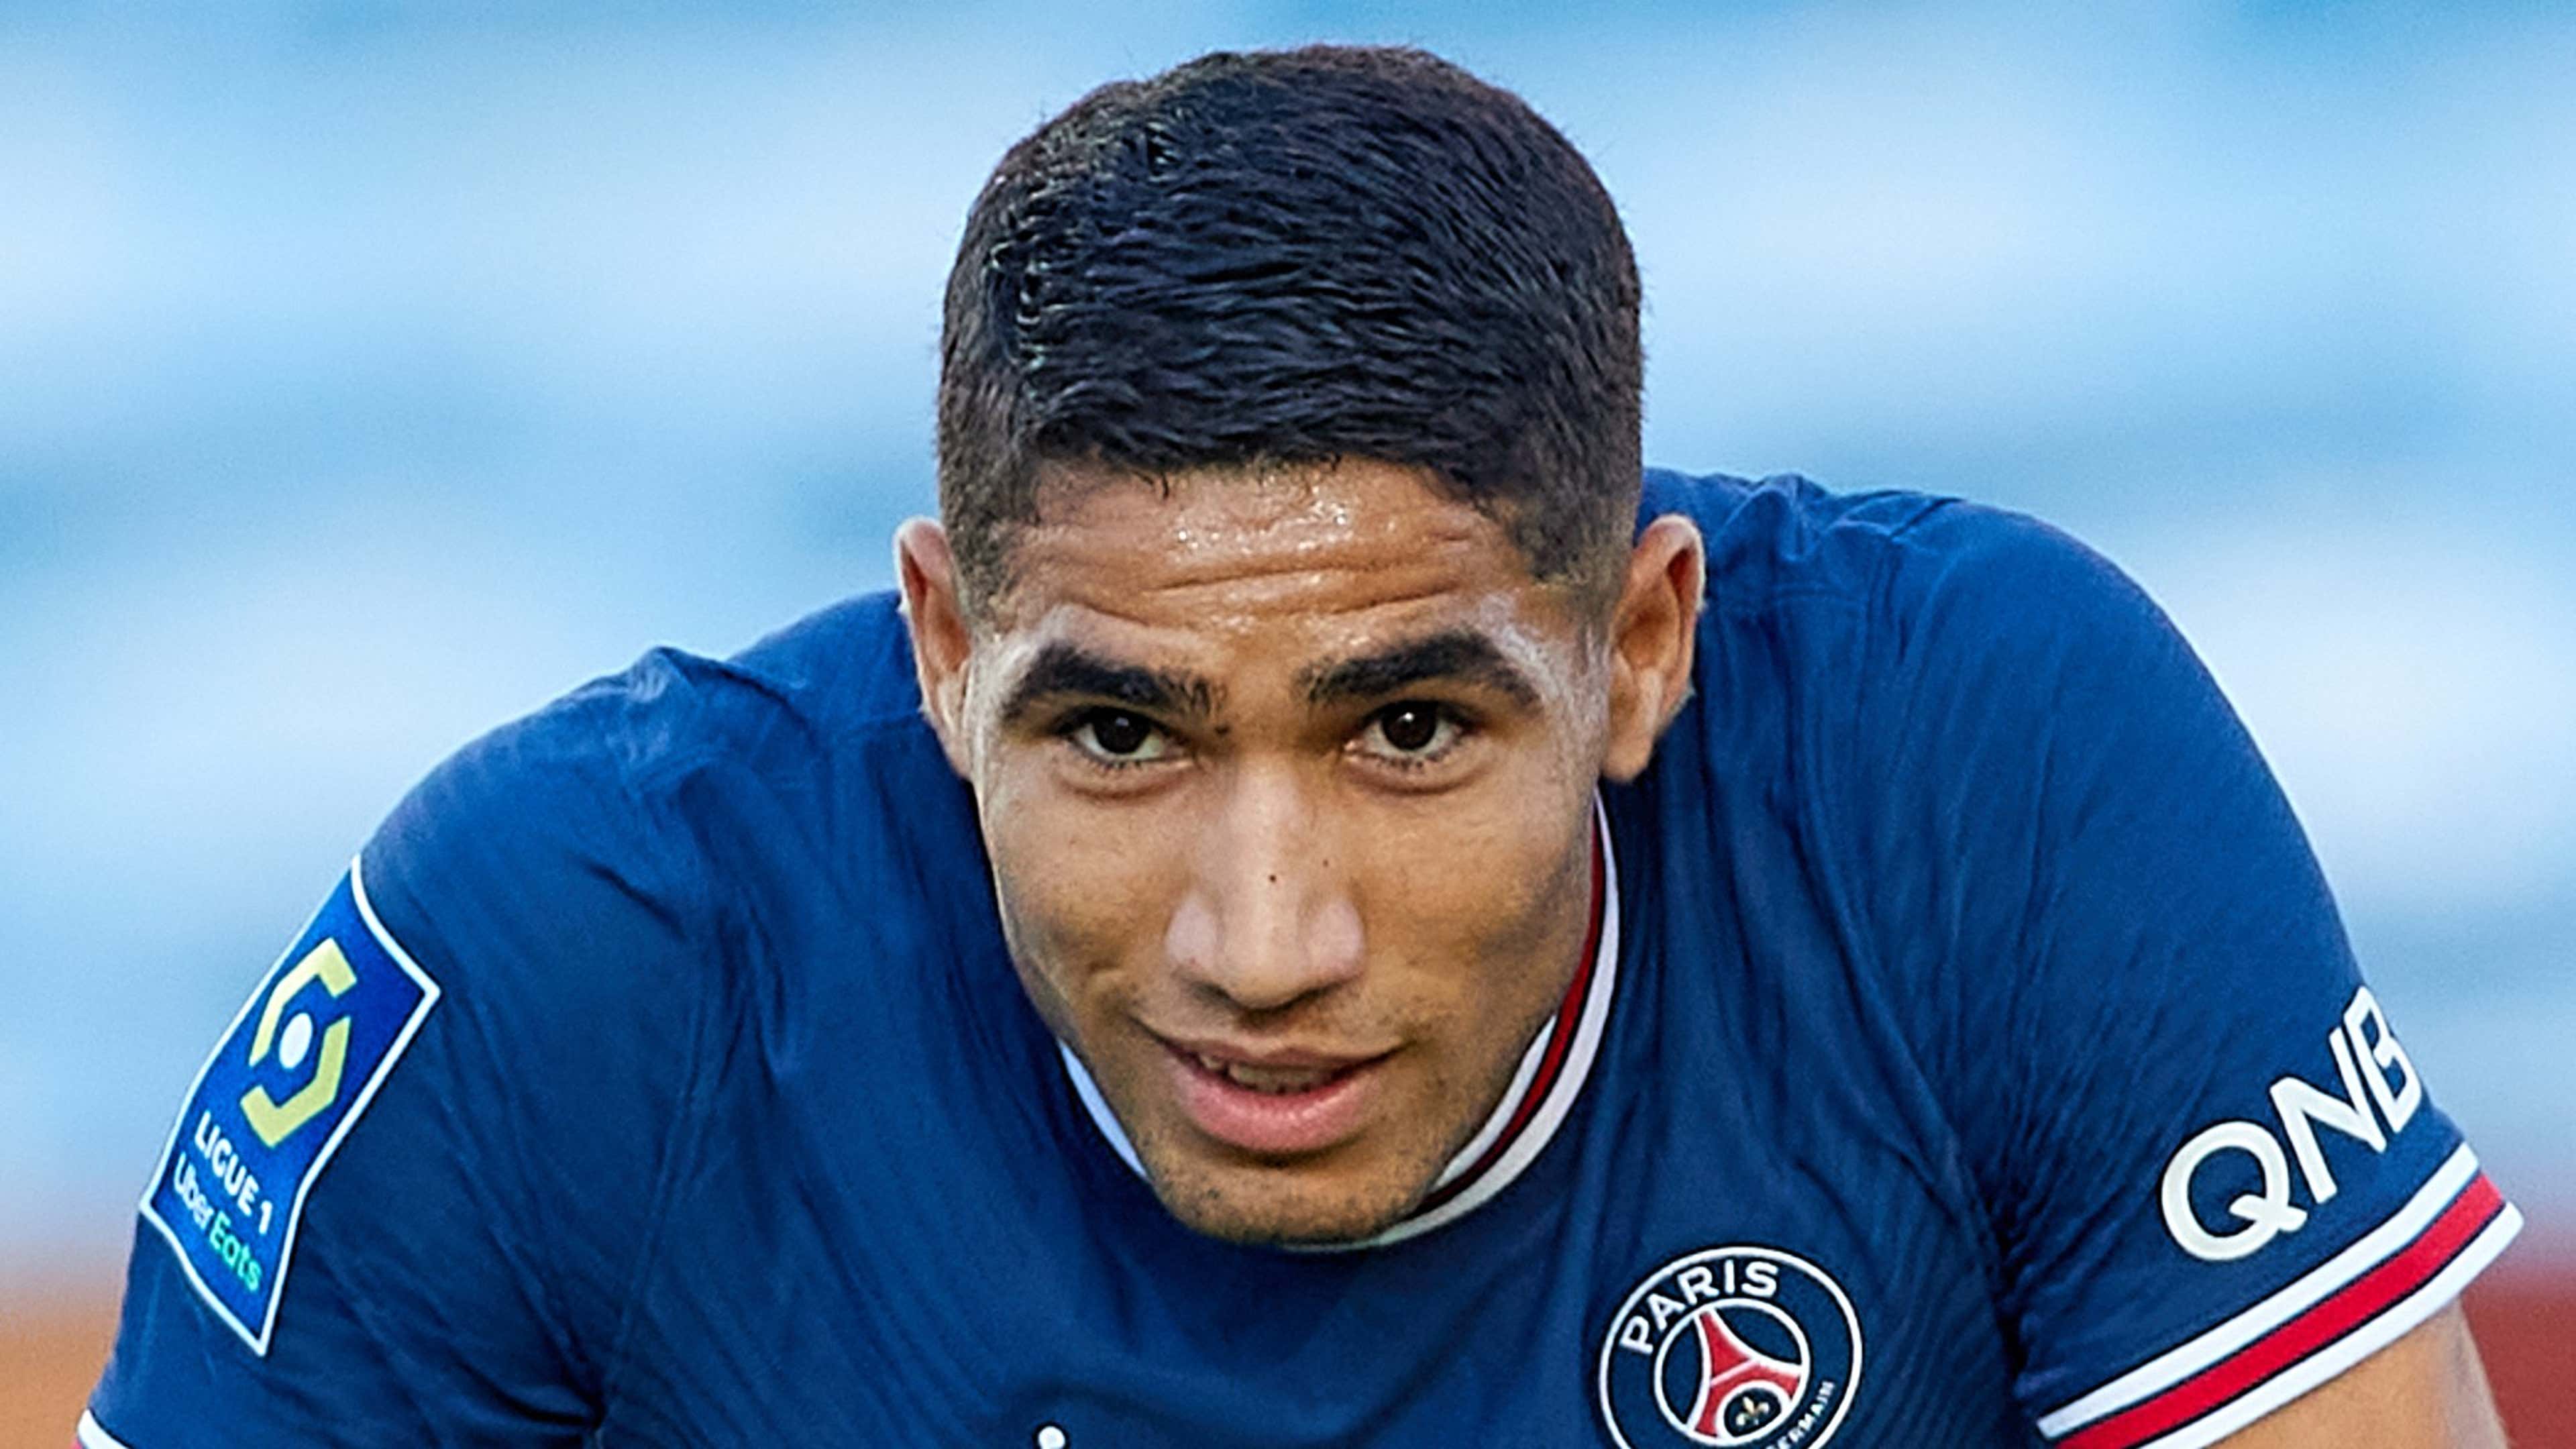 Hakimi's dream is to play for Real Madrid again' - Ex-Inter boss Conte sees  'world class' potential in PSG star